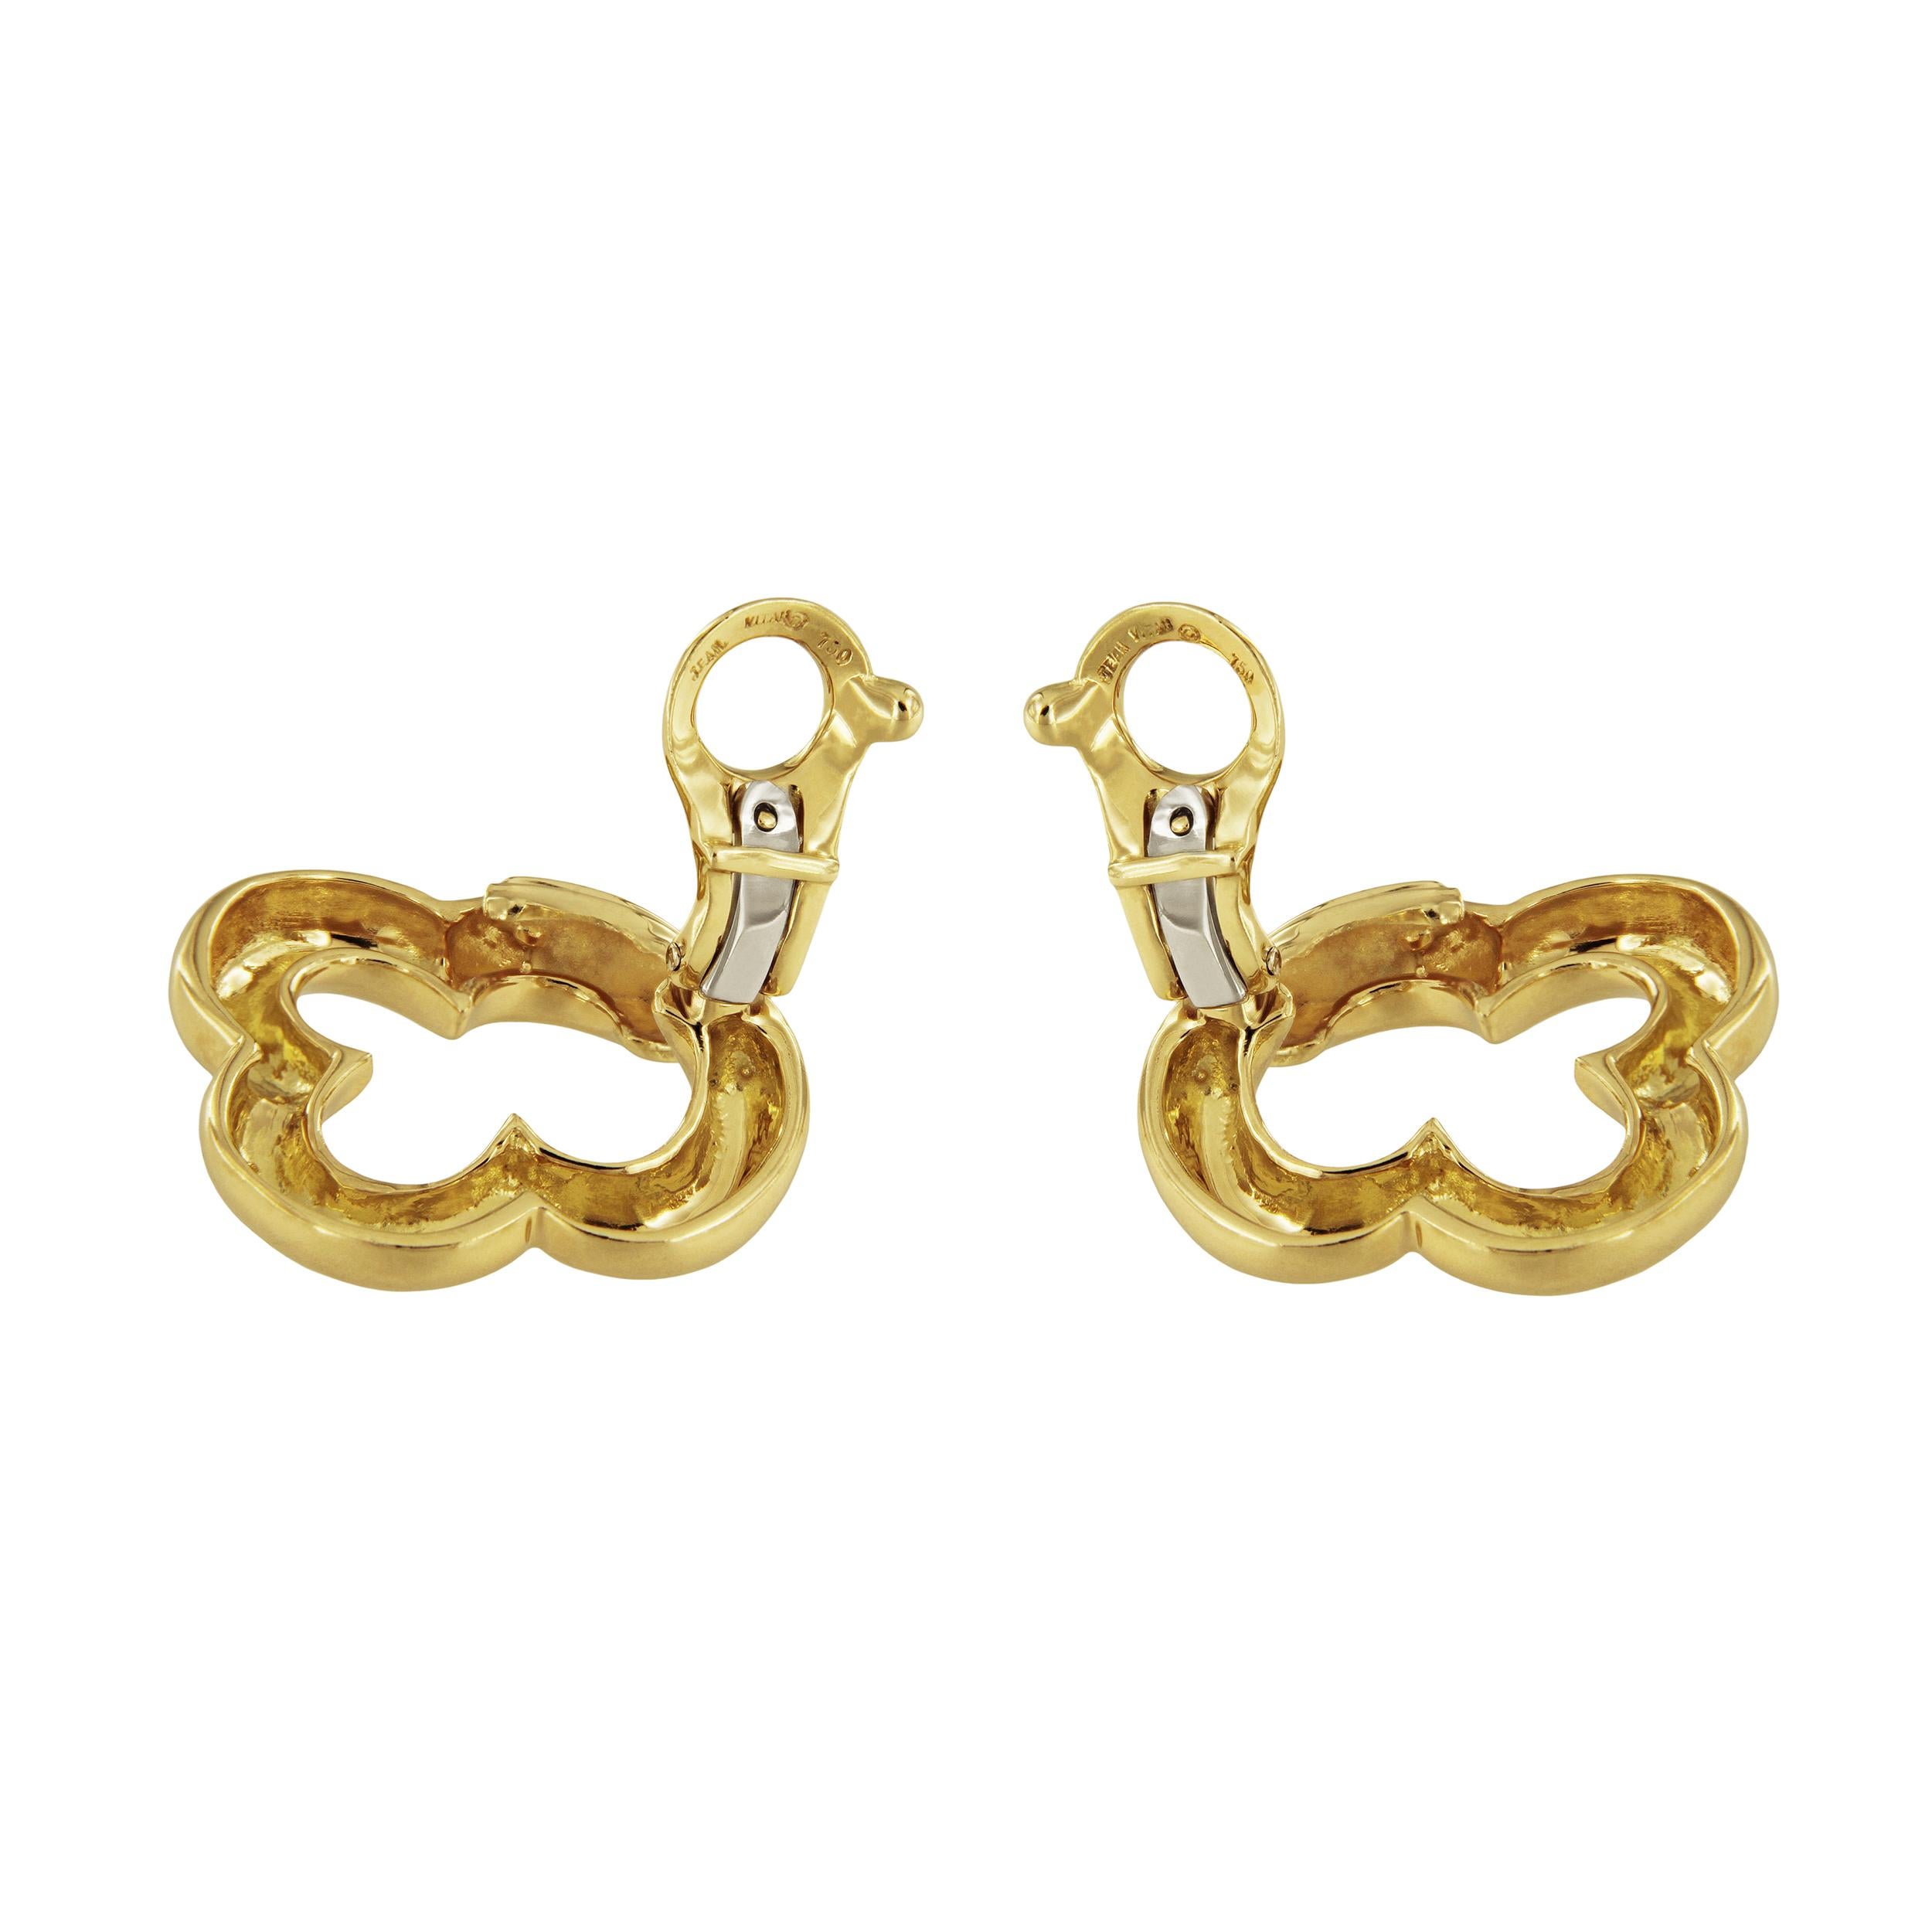 -Mint condition
-18k Yellow Gold
-Earrings dimension: 0.9x0.9”
-Earrings weight: 11.6gr
-Clip on
Comes with generic box